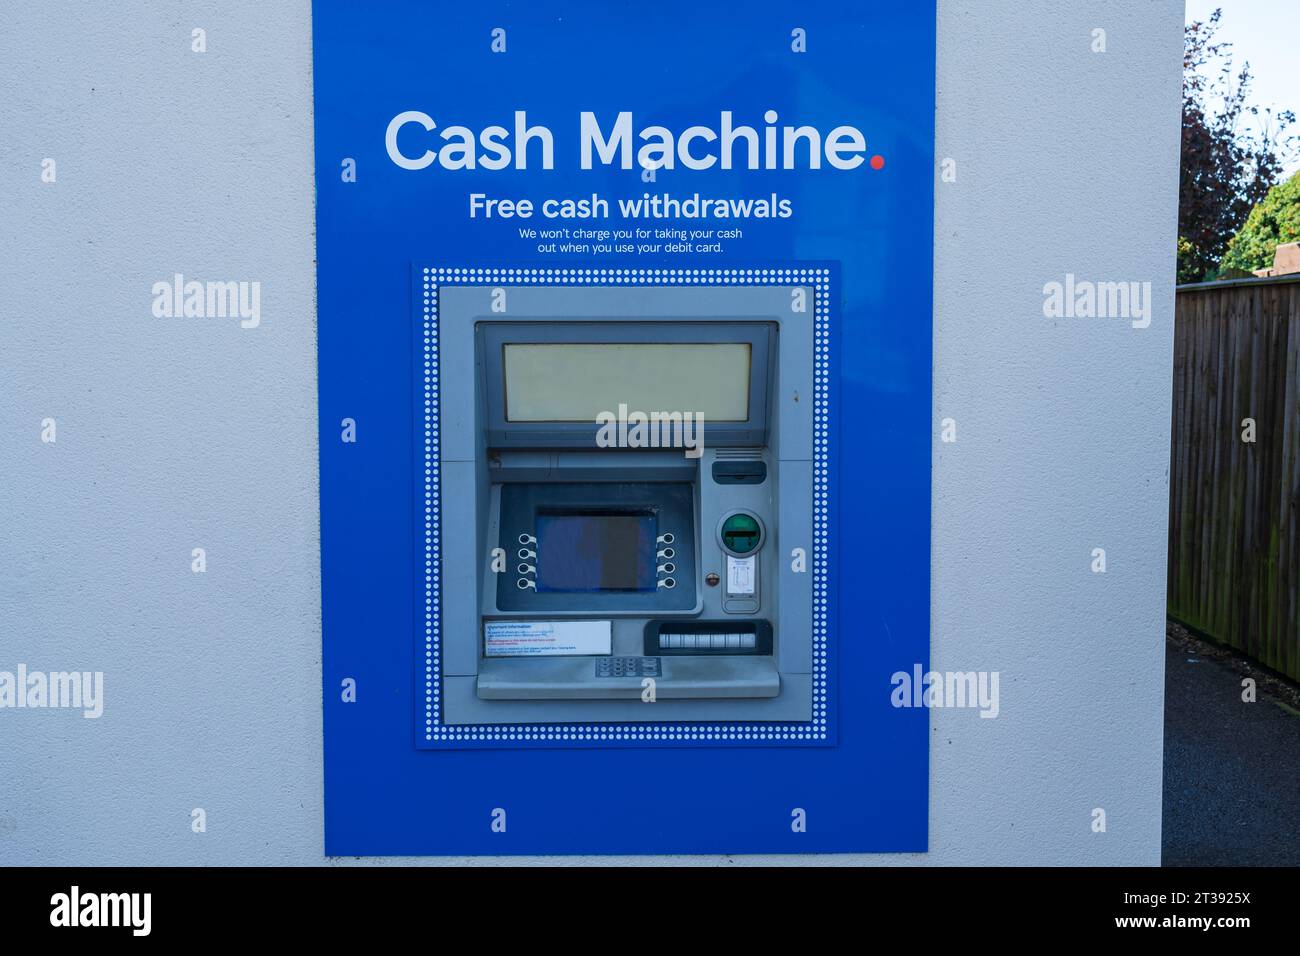 Cash Machine or ATM built into a shop wall in the UK Stock Photo